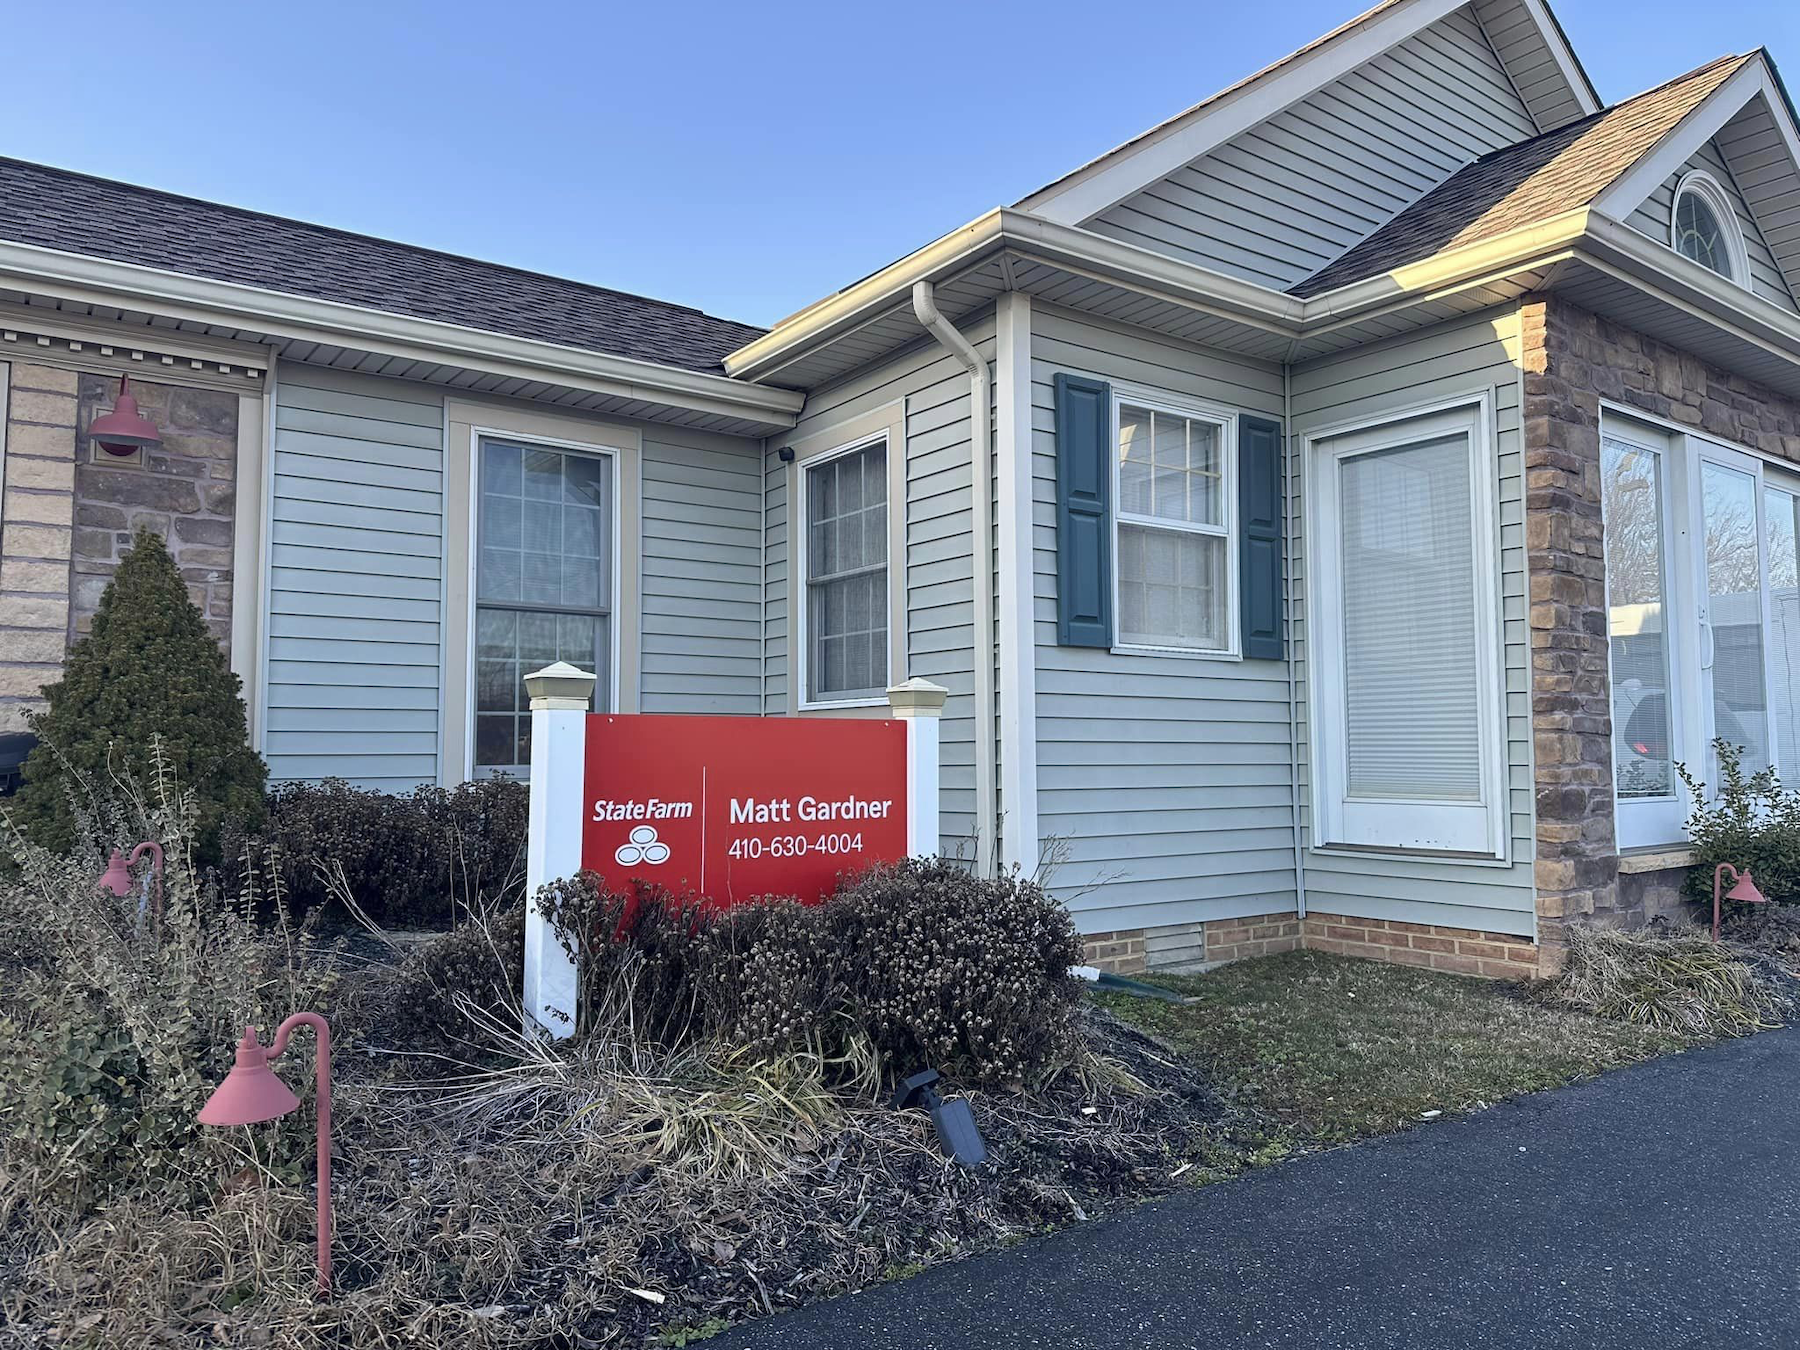 The Matt Gardner State Farm White Marsh location had a smooth grand opening on Friday, March 1st! Give our office a call for any of your insurance and financial services needs!